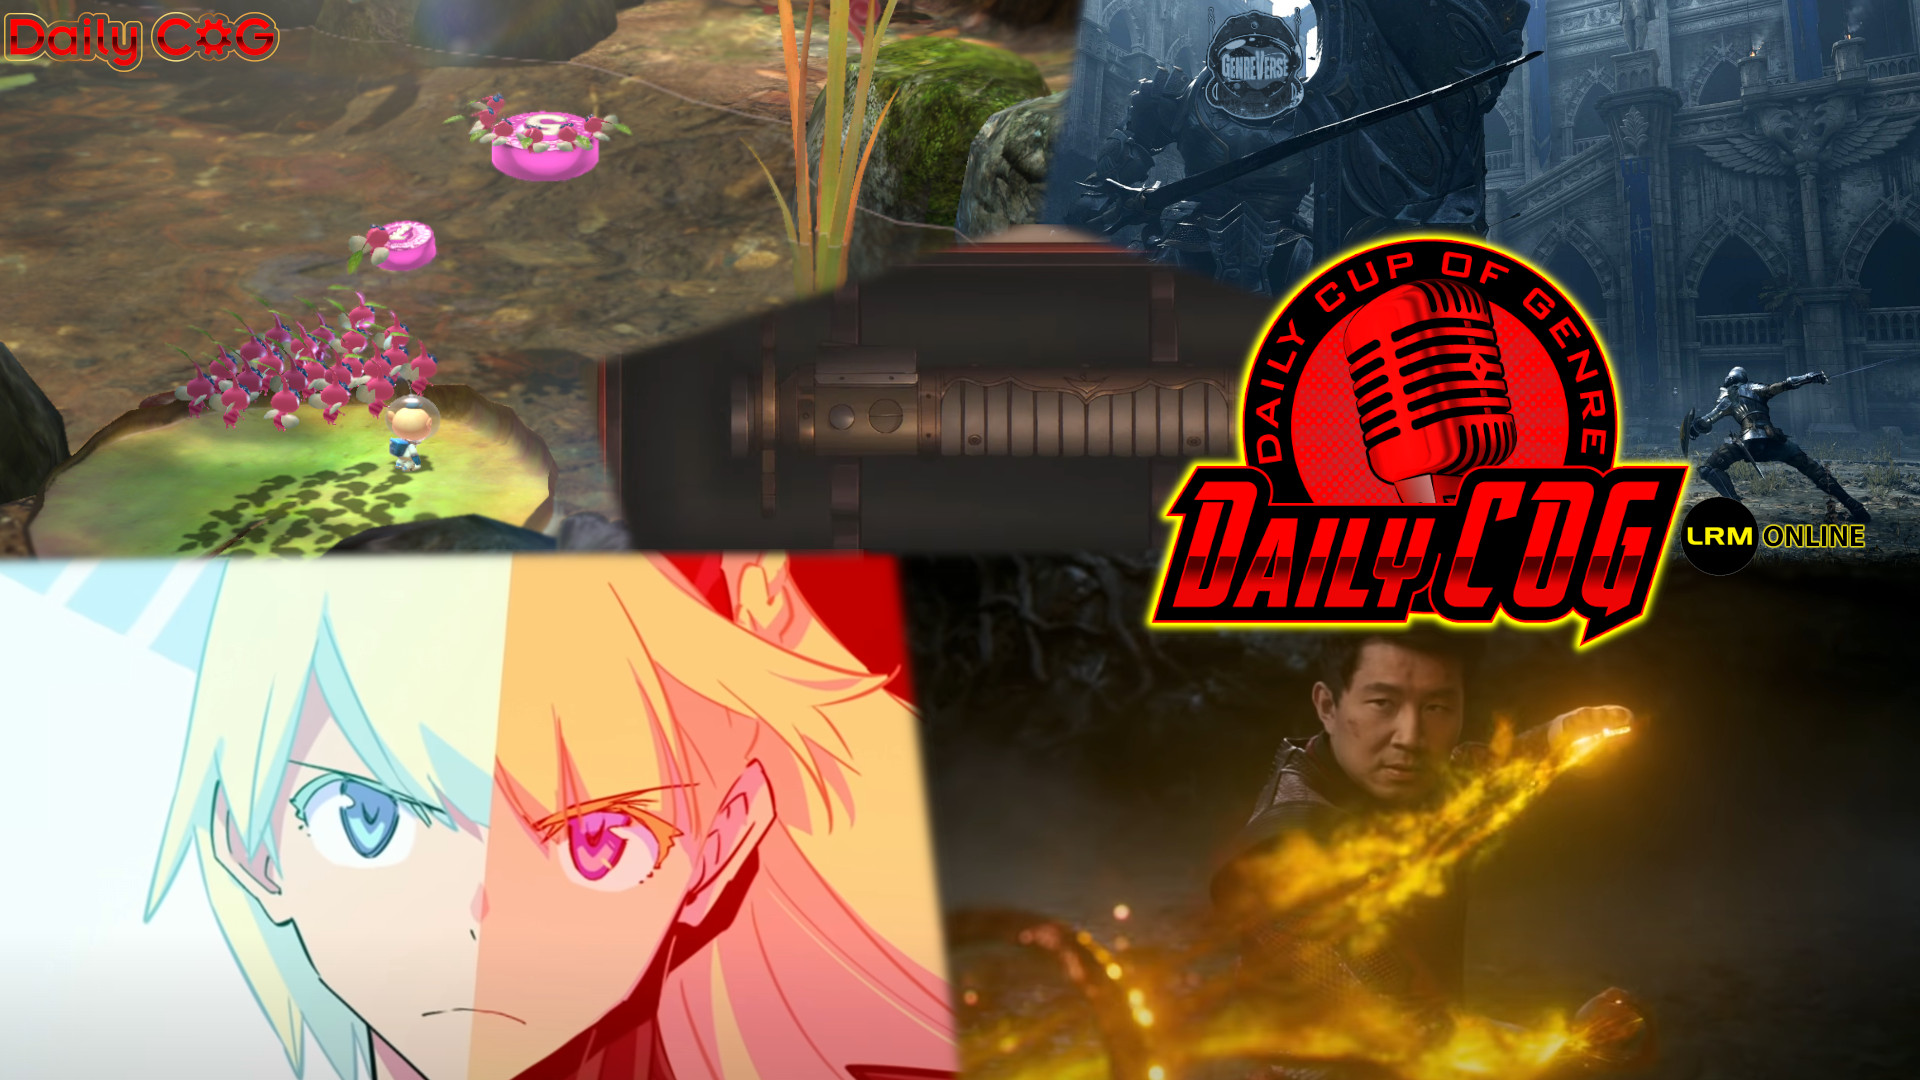 Shang-Chi First Reaction, Easy Mode In ALL Games: Weakness Or Smart Business?, & Anime In Star Wars Isn’t For Everyone | Daily COG